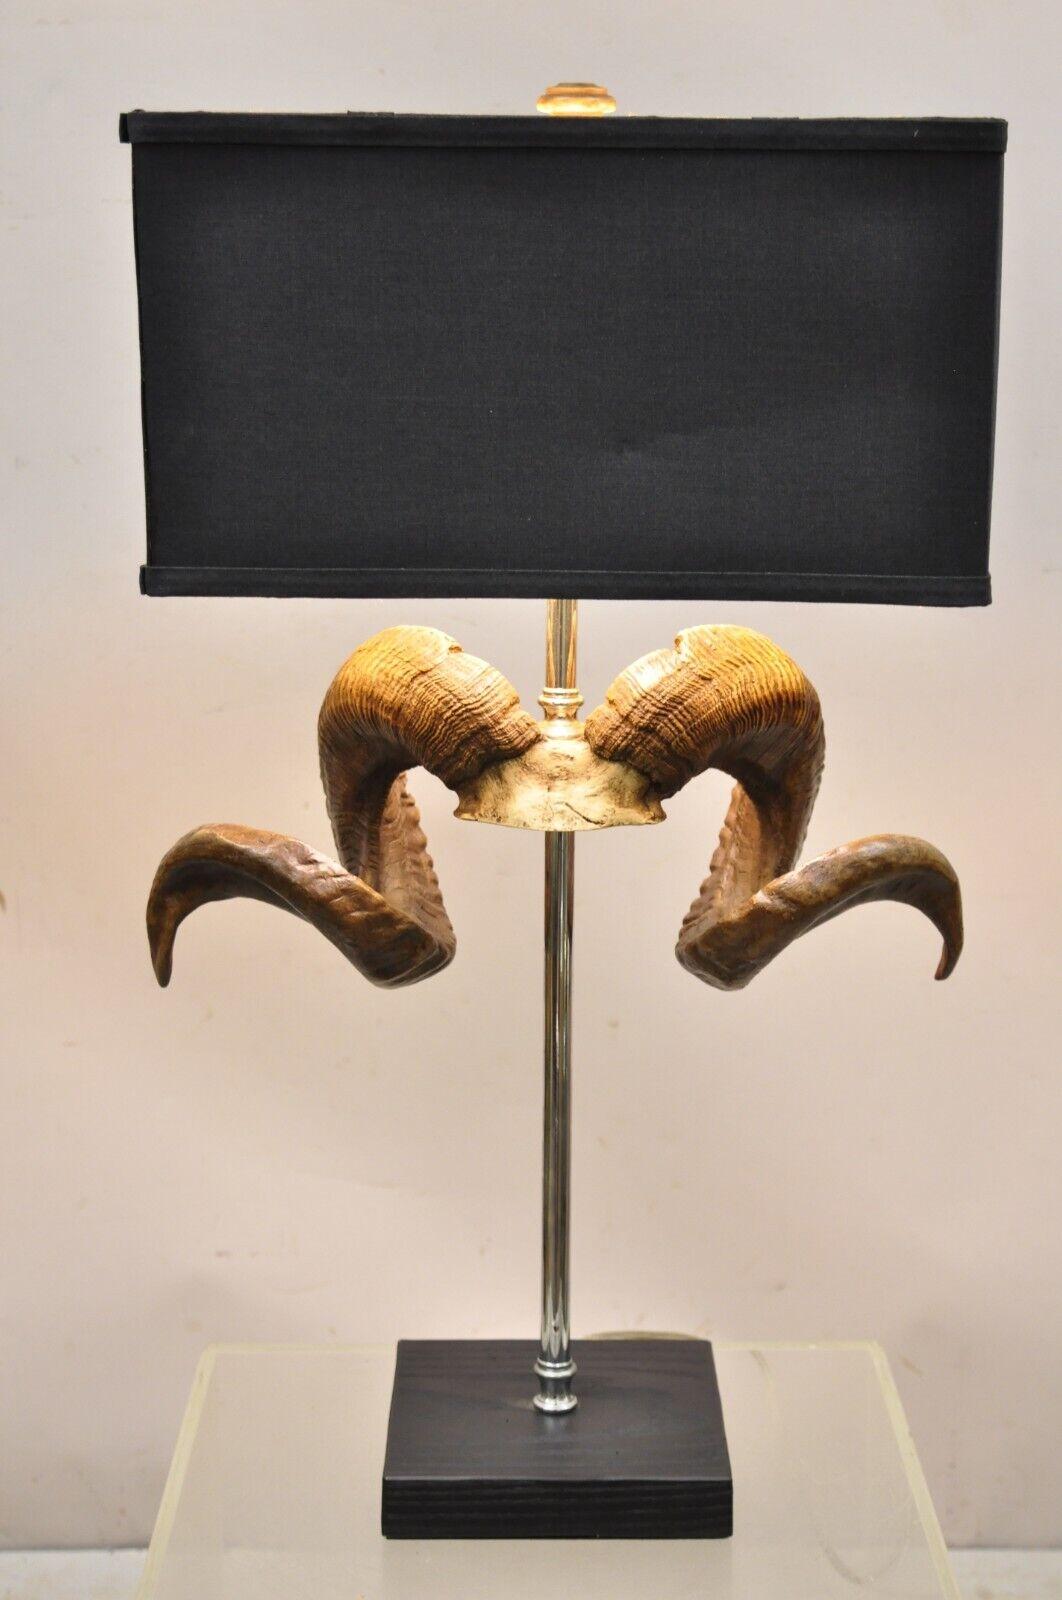 Barbara Cosgrove Ram Horn Modern Decorator Table Lamp. Item feature the original shade, cast resin rams horns, black wooden base, very nice item, great style and form, circa Late 20th - Early 21st Century .Measurements: 29